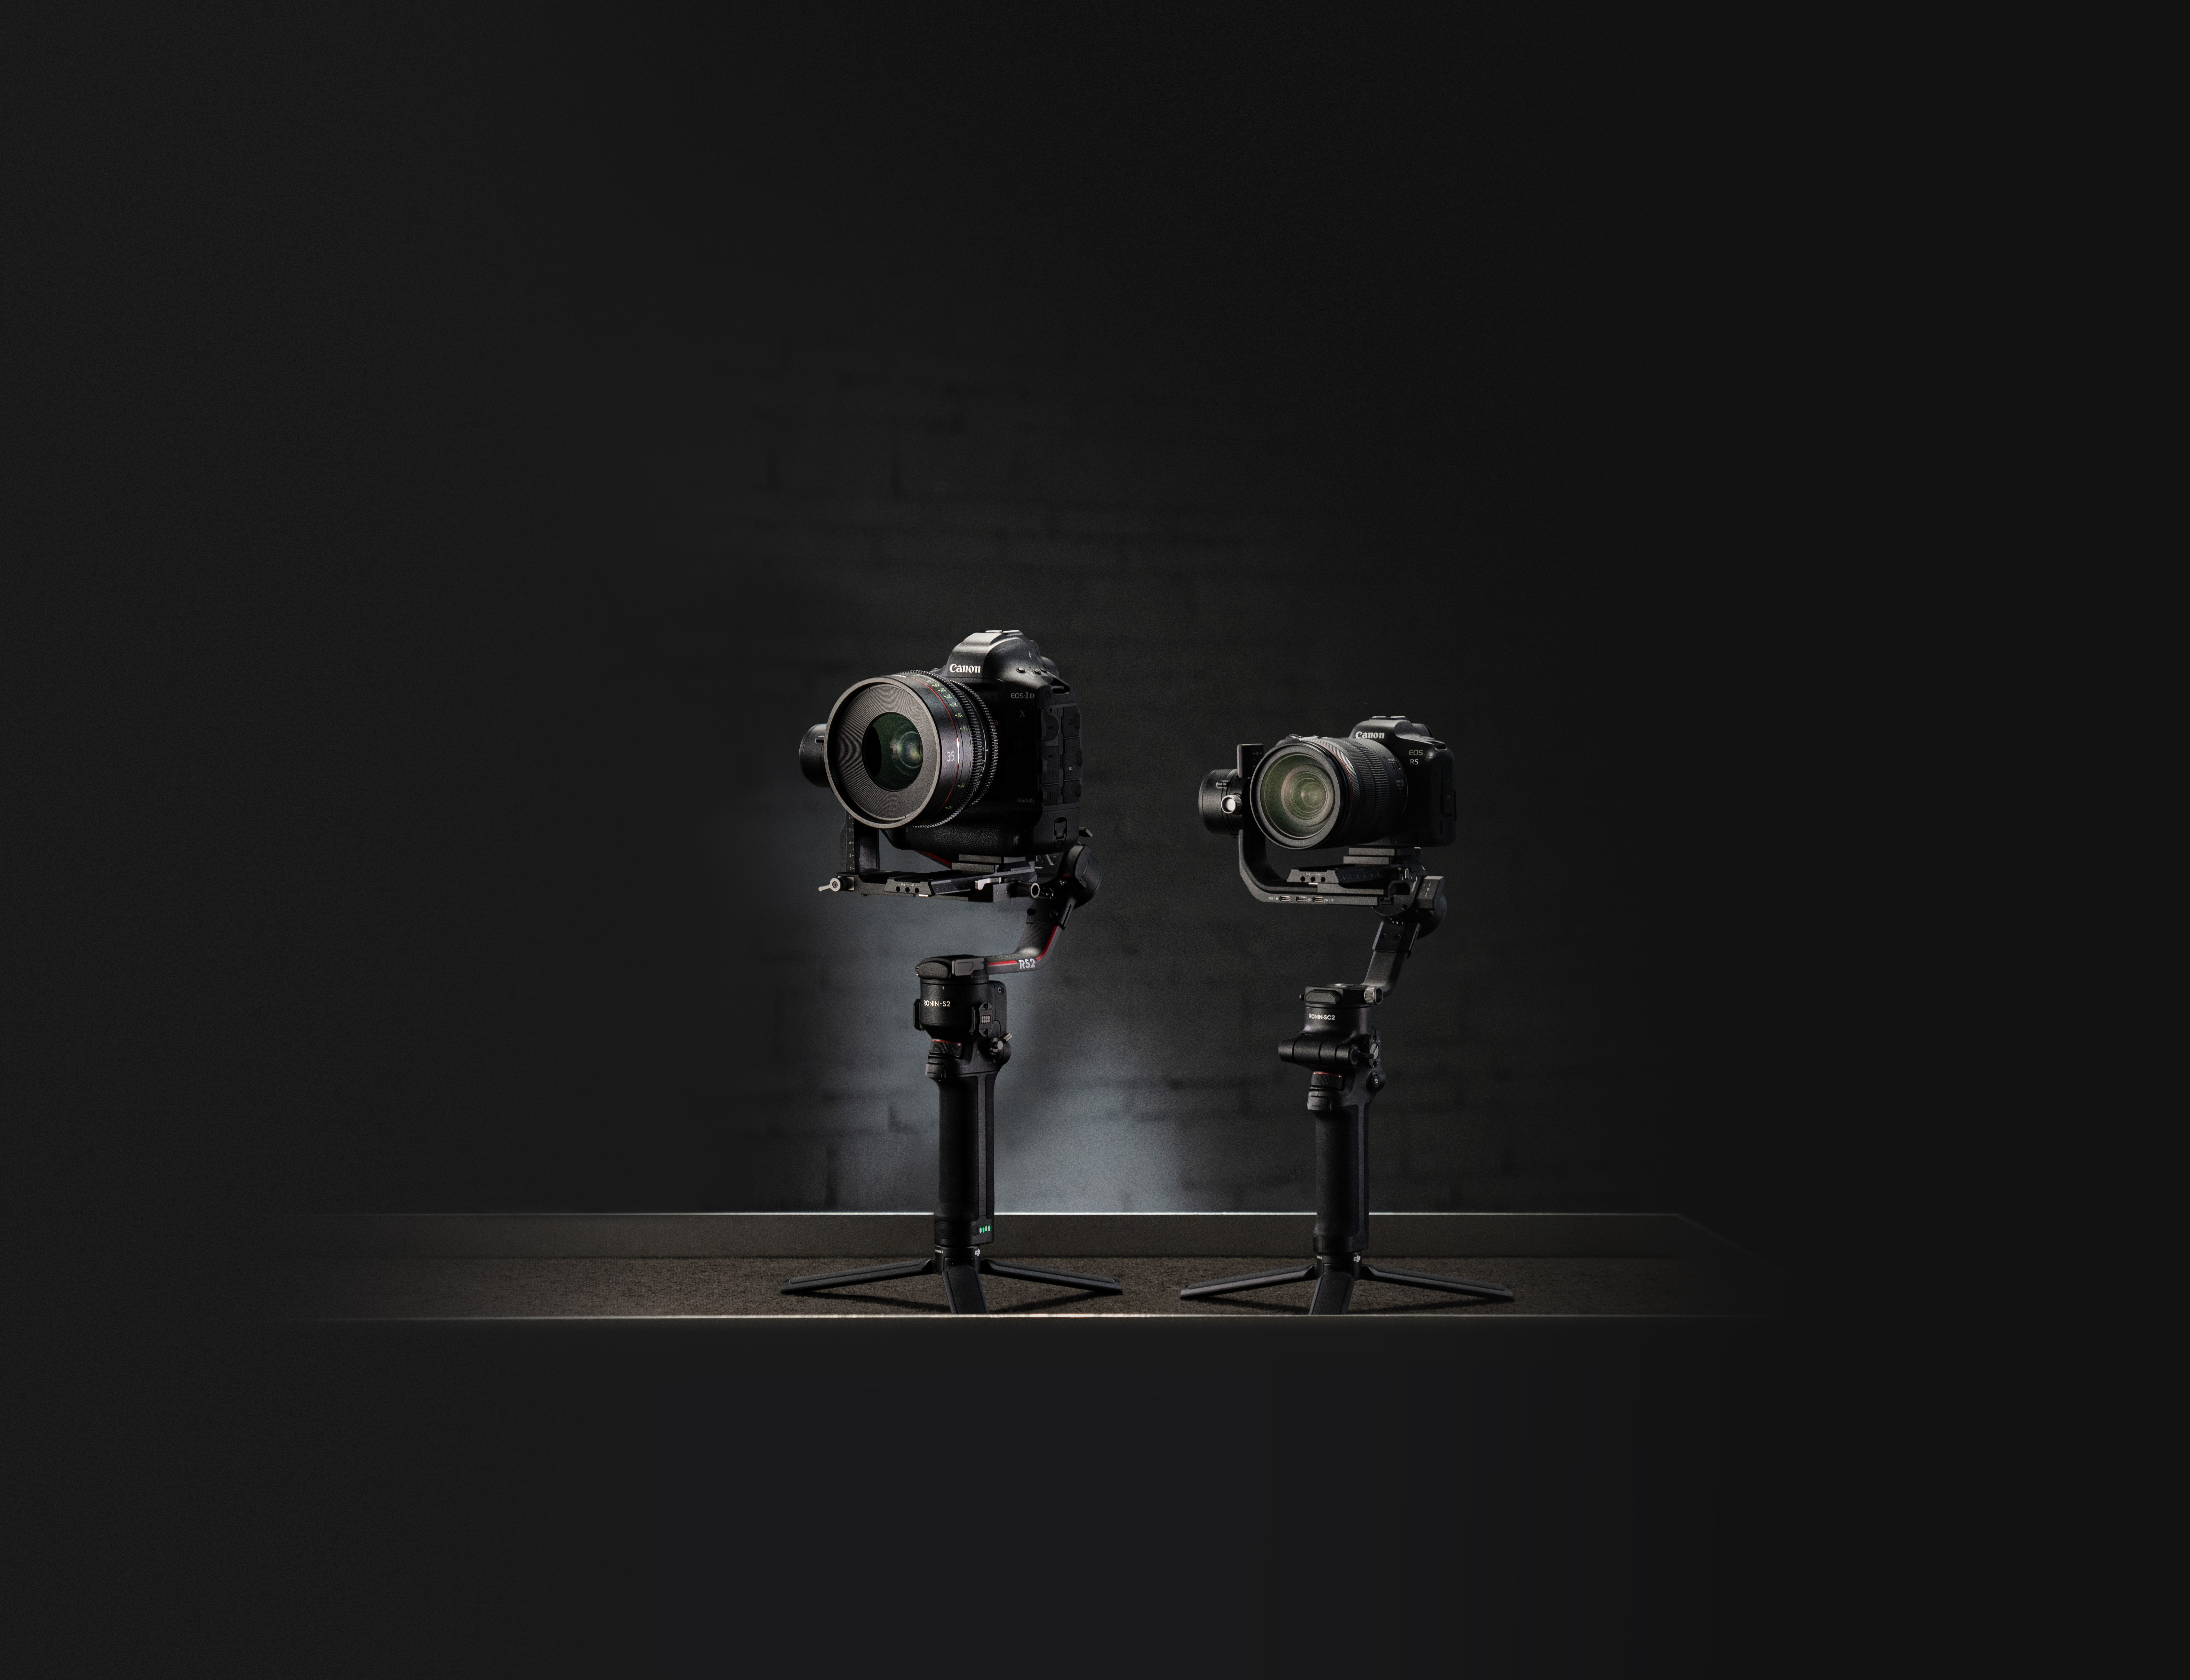 Everything about DJI's powerful new Ronin gimbals